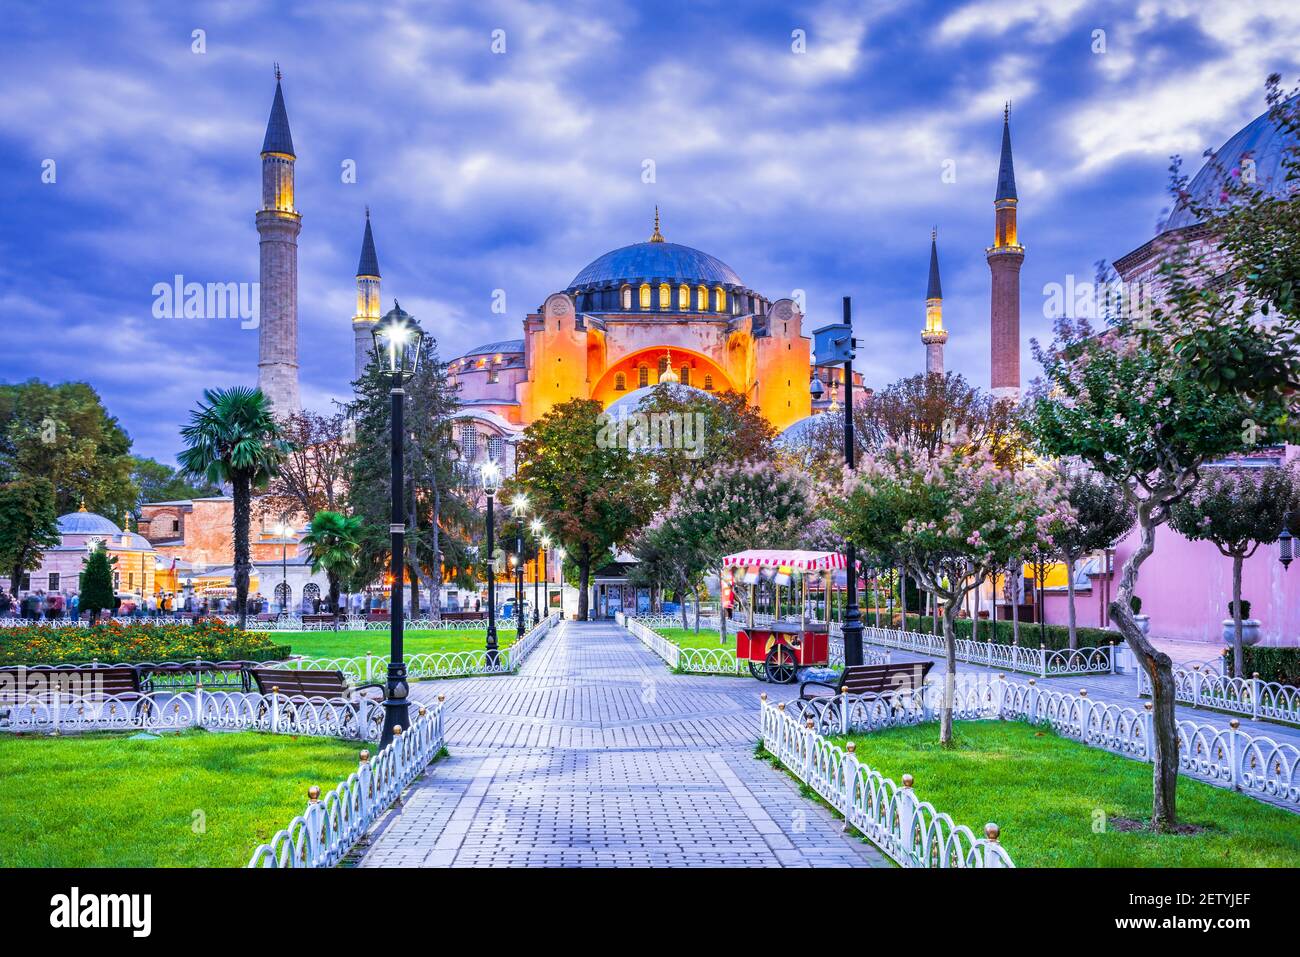 Istanbul, Turkey - Hagia Sophia dome and minarets in the old Sultanahmet, medieval Constantinople Stock Photo